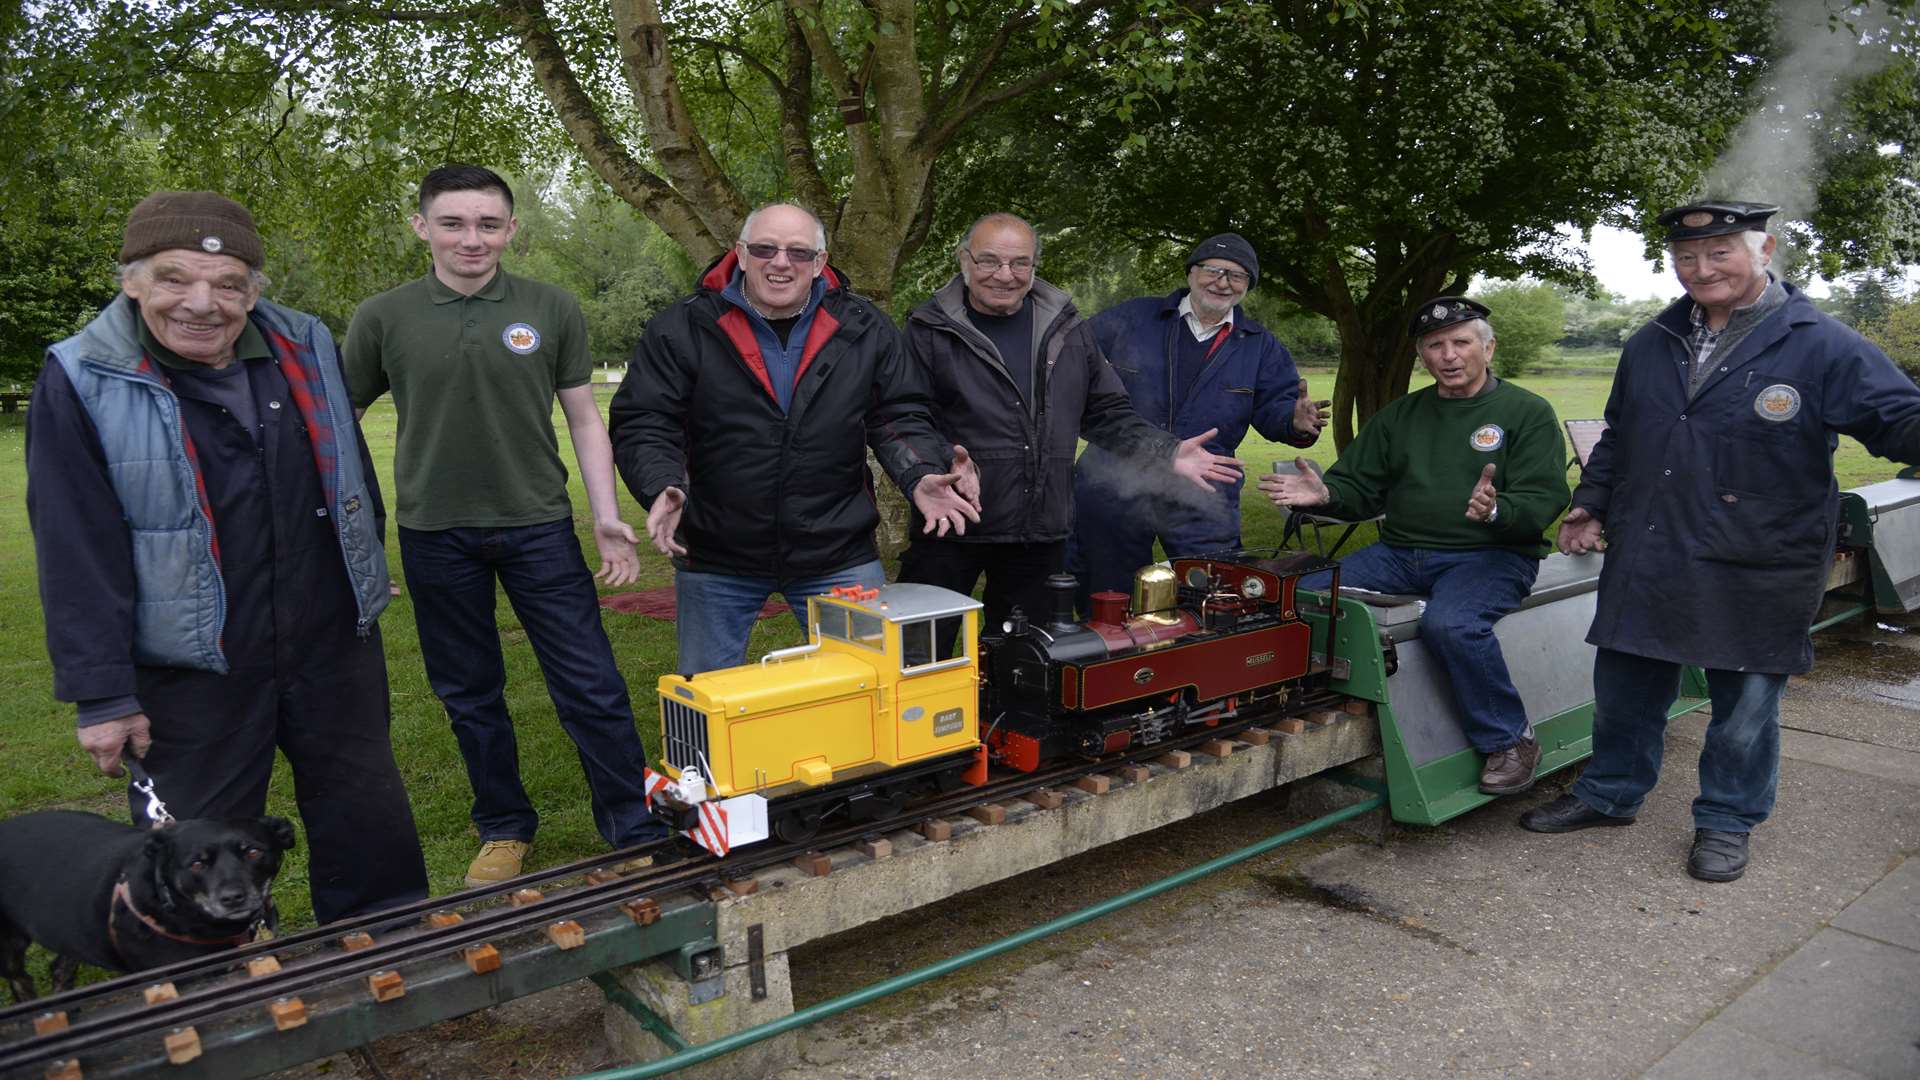 Canterbury and District Model Engineering members have rebuilt their track following metal theft